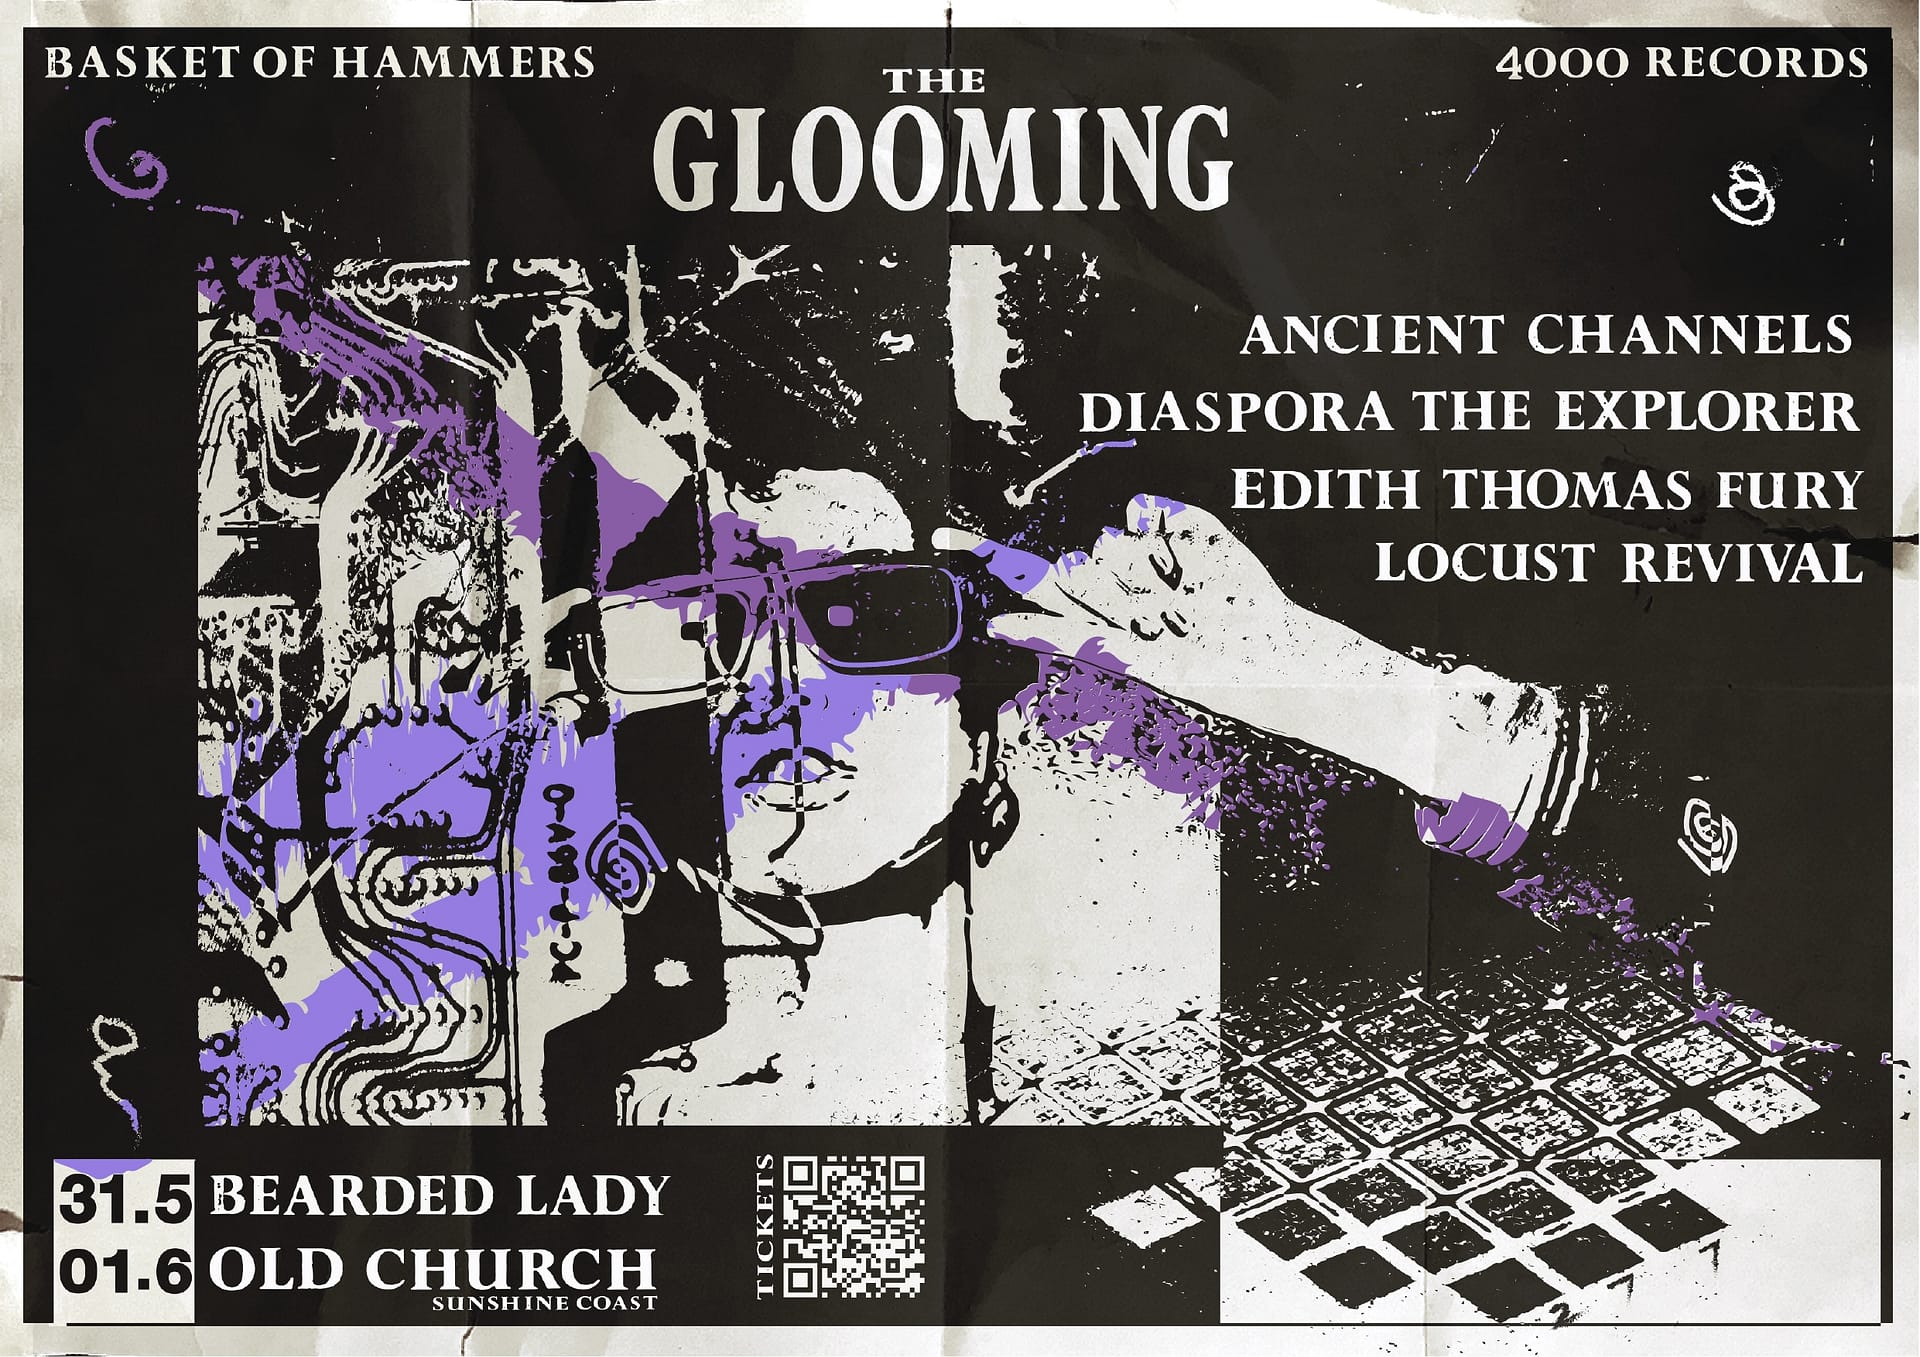 BASKET OF HAMMERS + 4000 RECORDS Present 2nd Annual Celebration Of Dark Sounds THE GLOOMING